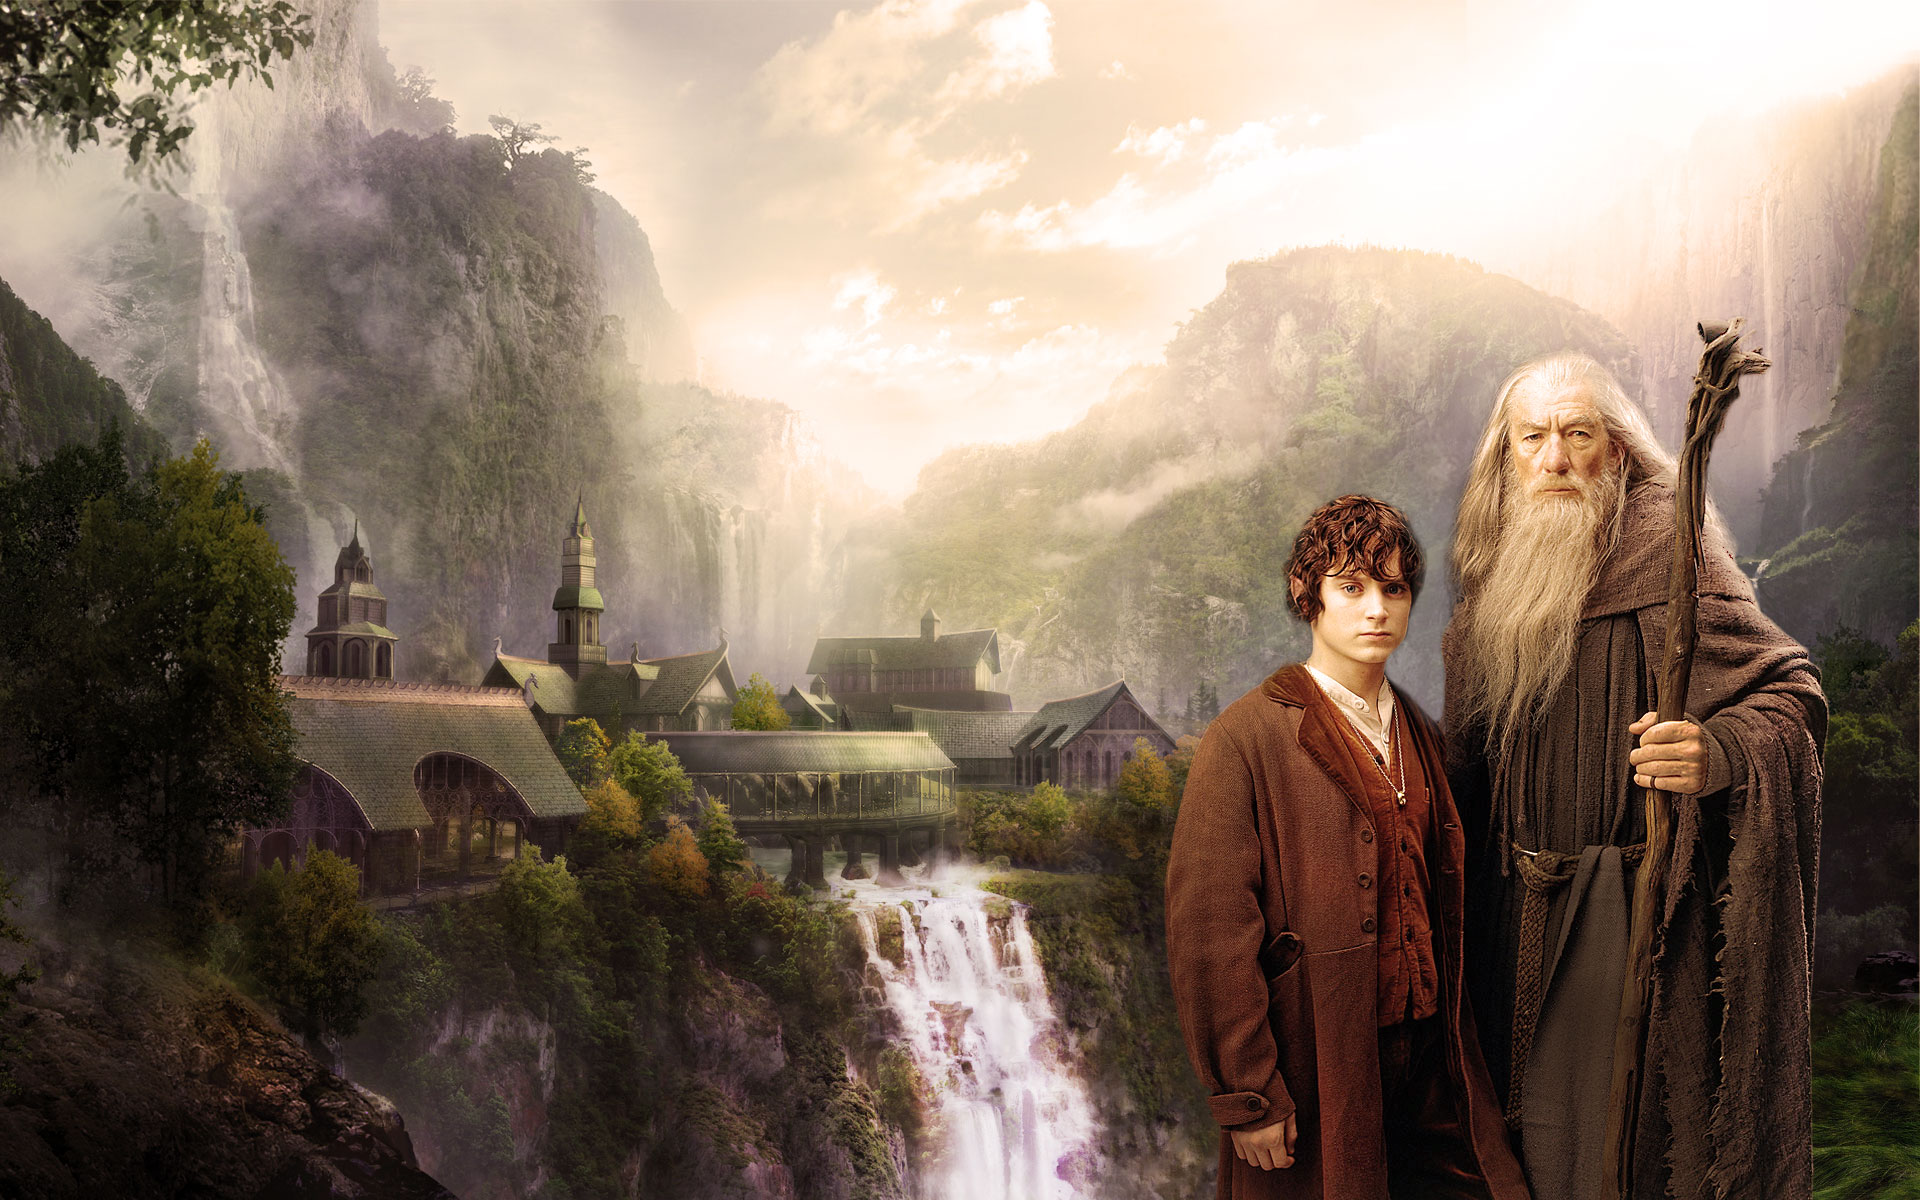 Movie The Hobbit An Unexpected Journey 1920x1200